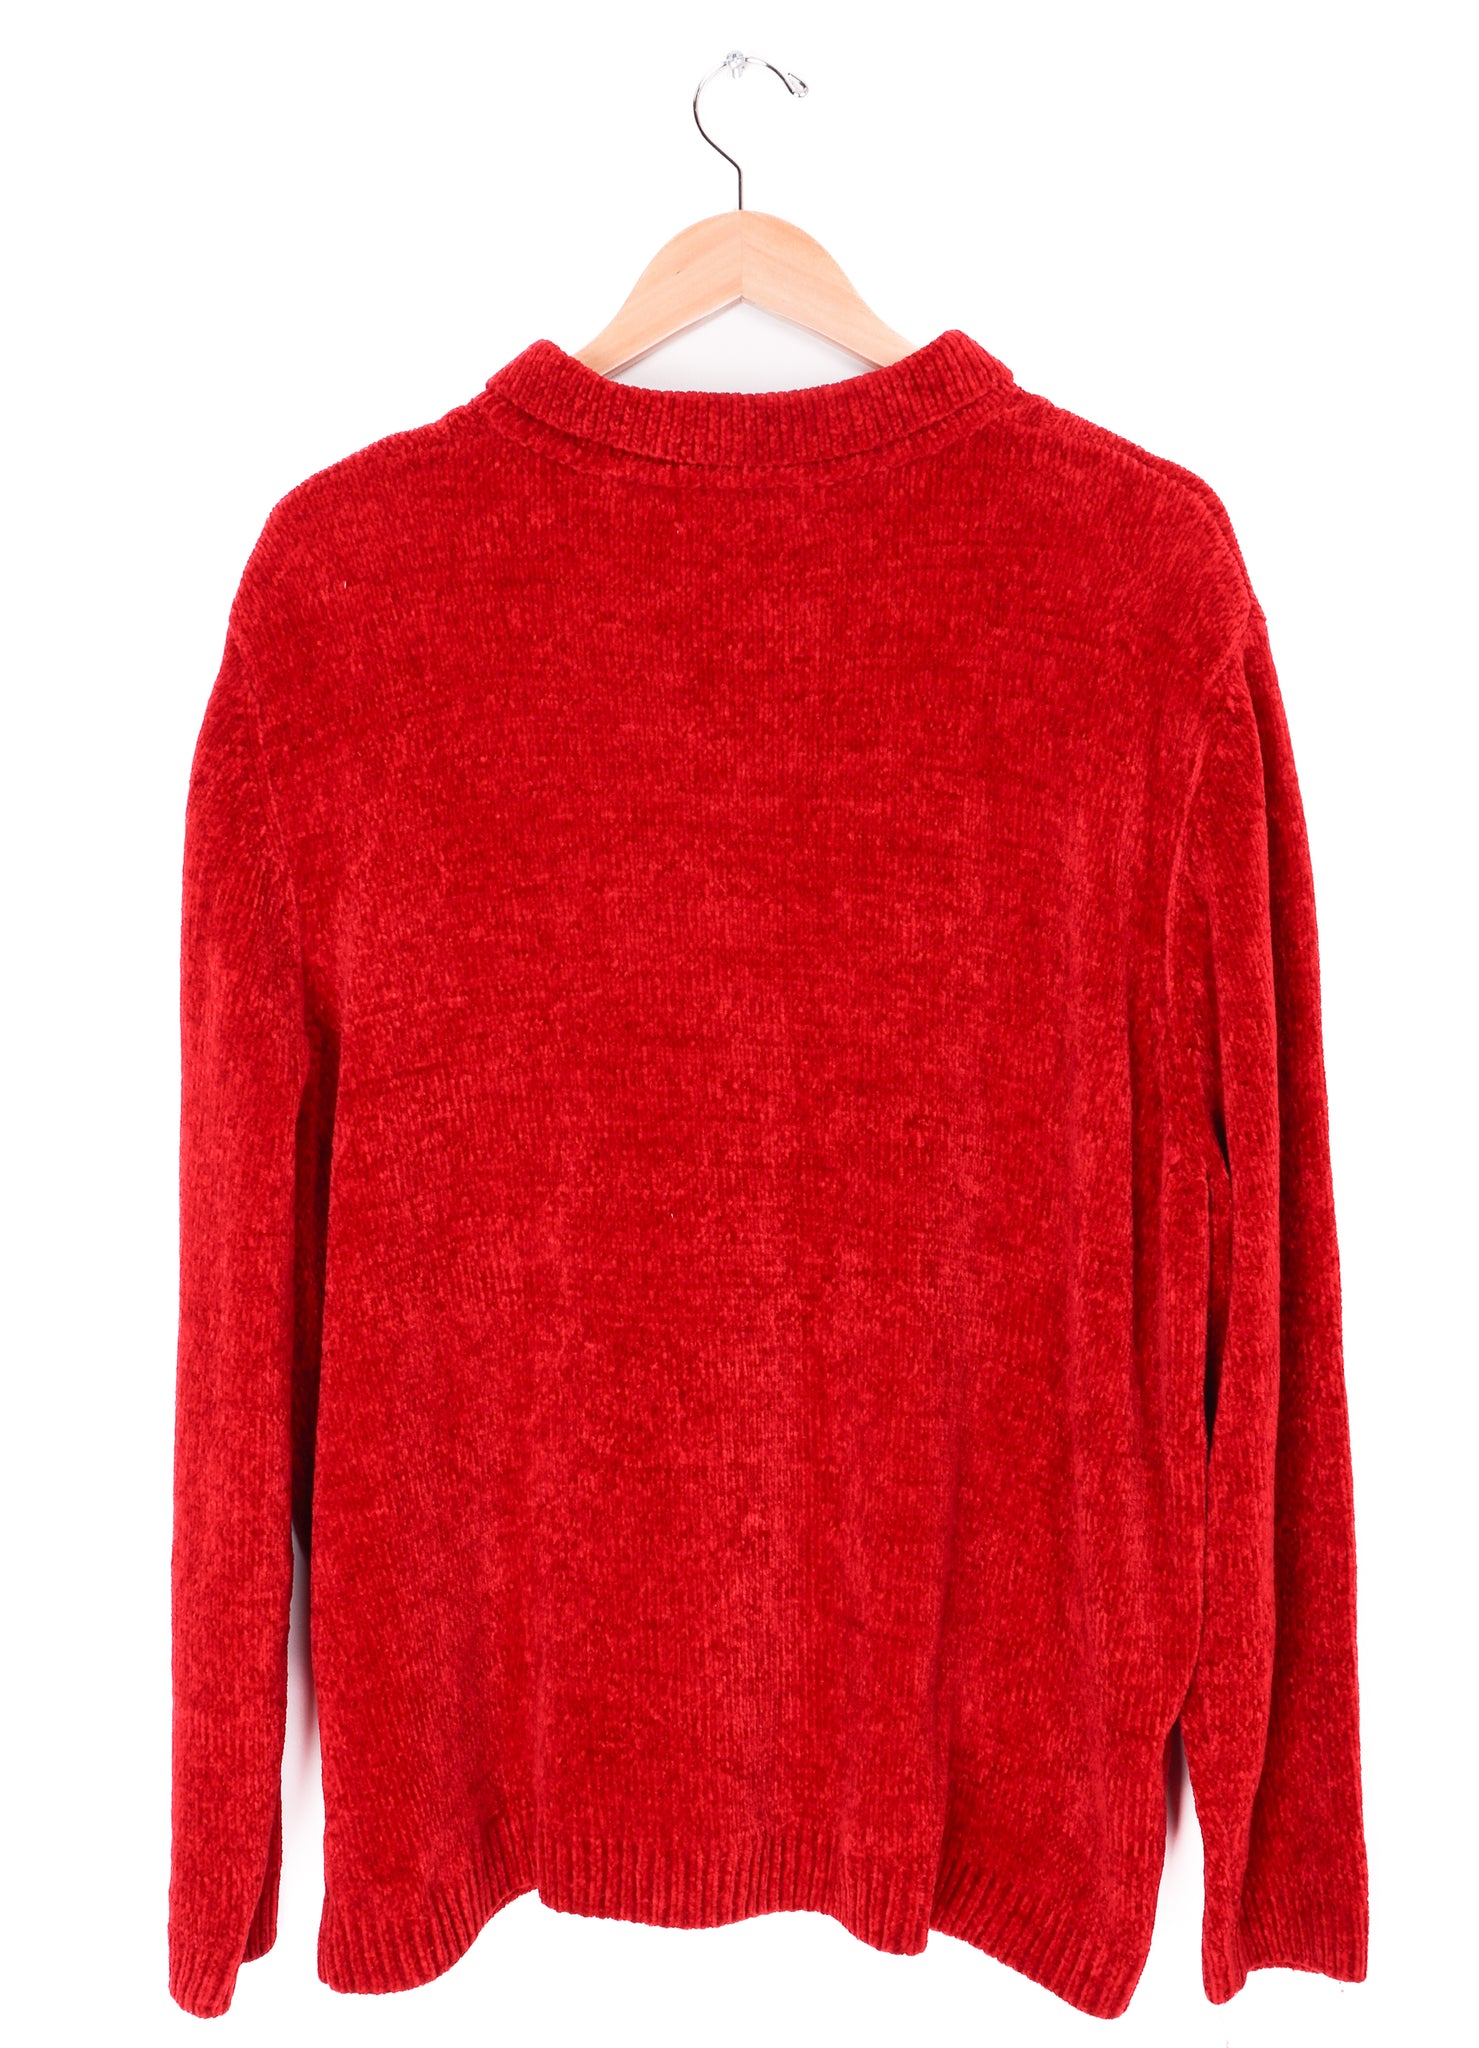 Alfred Dunner Red Knit Flowers Sweater